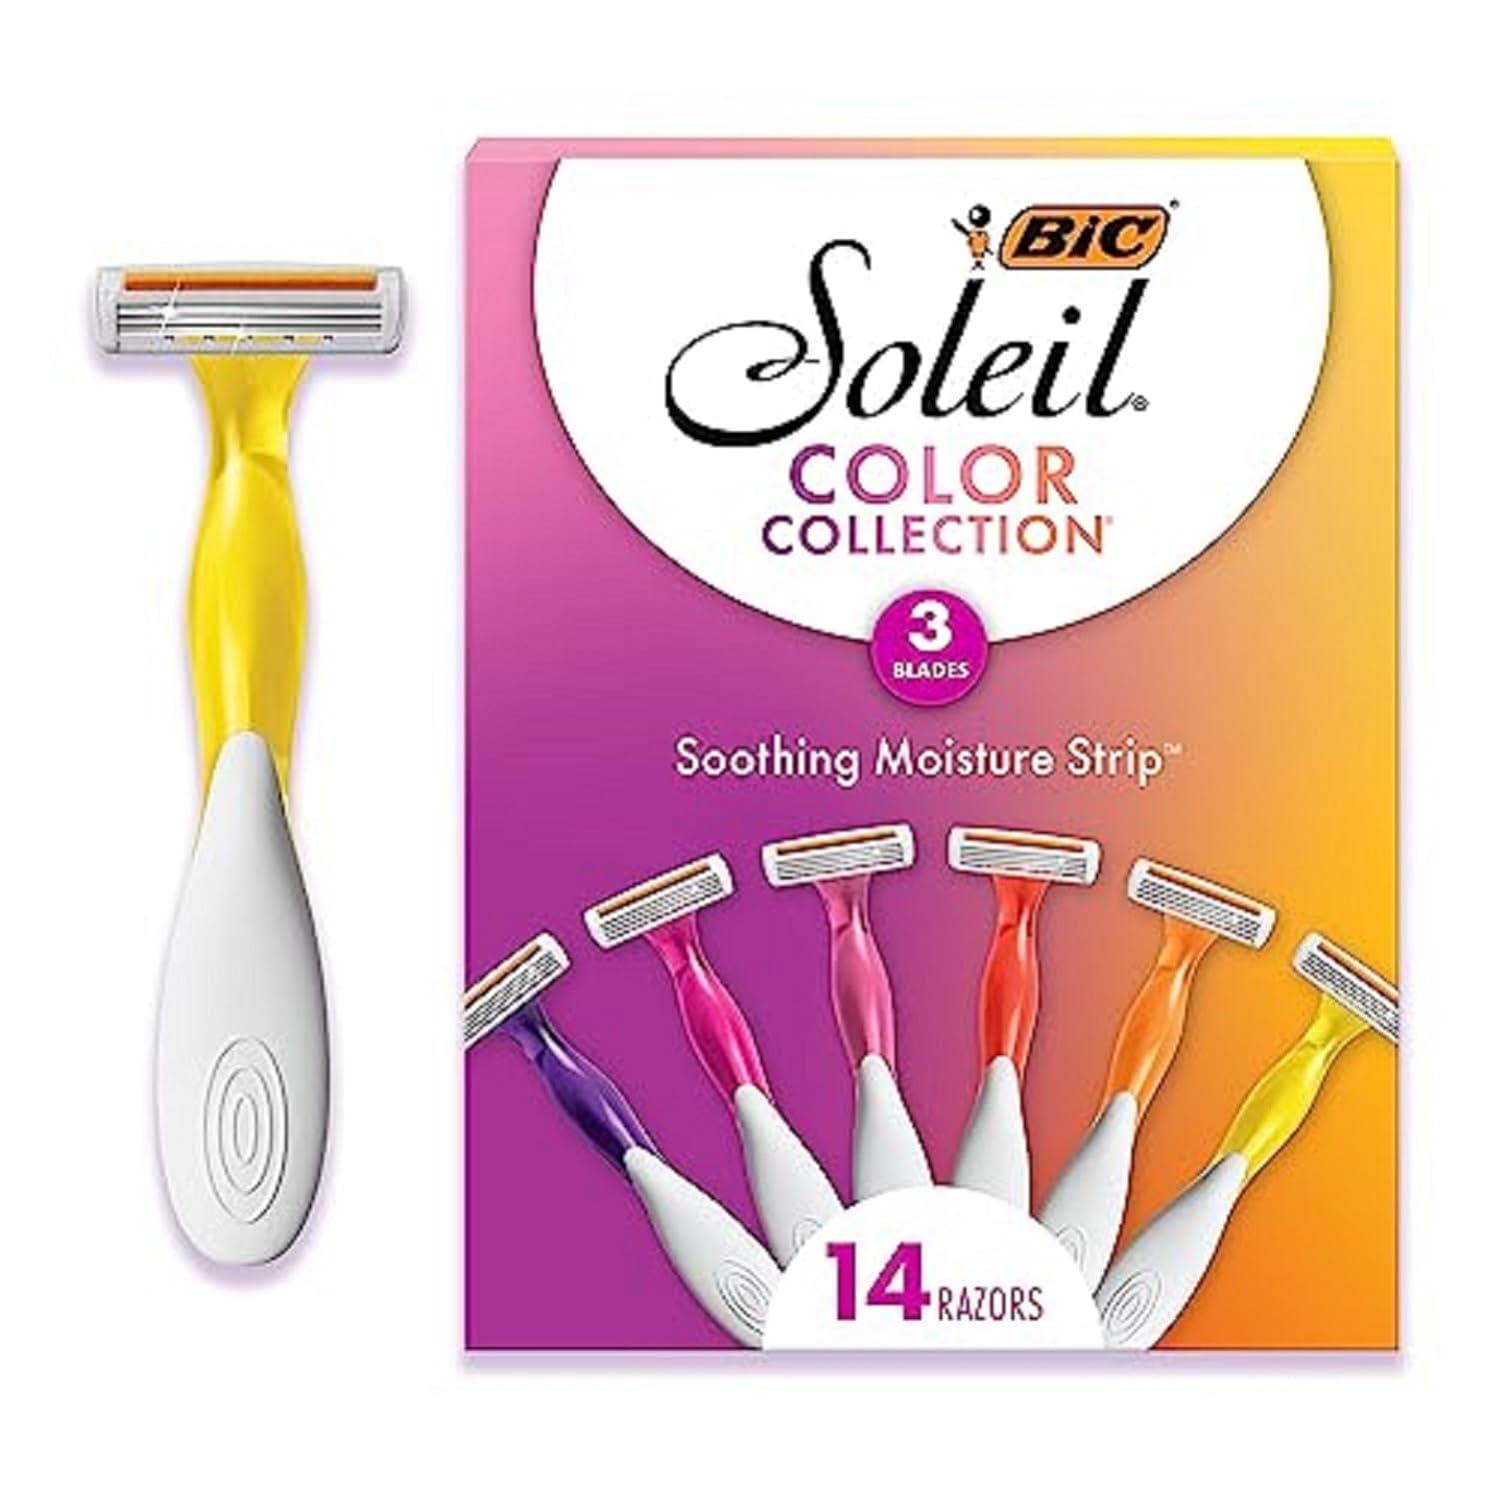 BIC Soleil Smooth Colors Women' Disposable Razors With Aloe Vera and vitamin E Lubricating Strip for Enhanced Glide, With 3 Blades, 14 Count